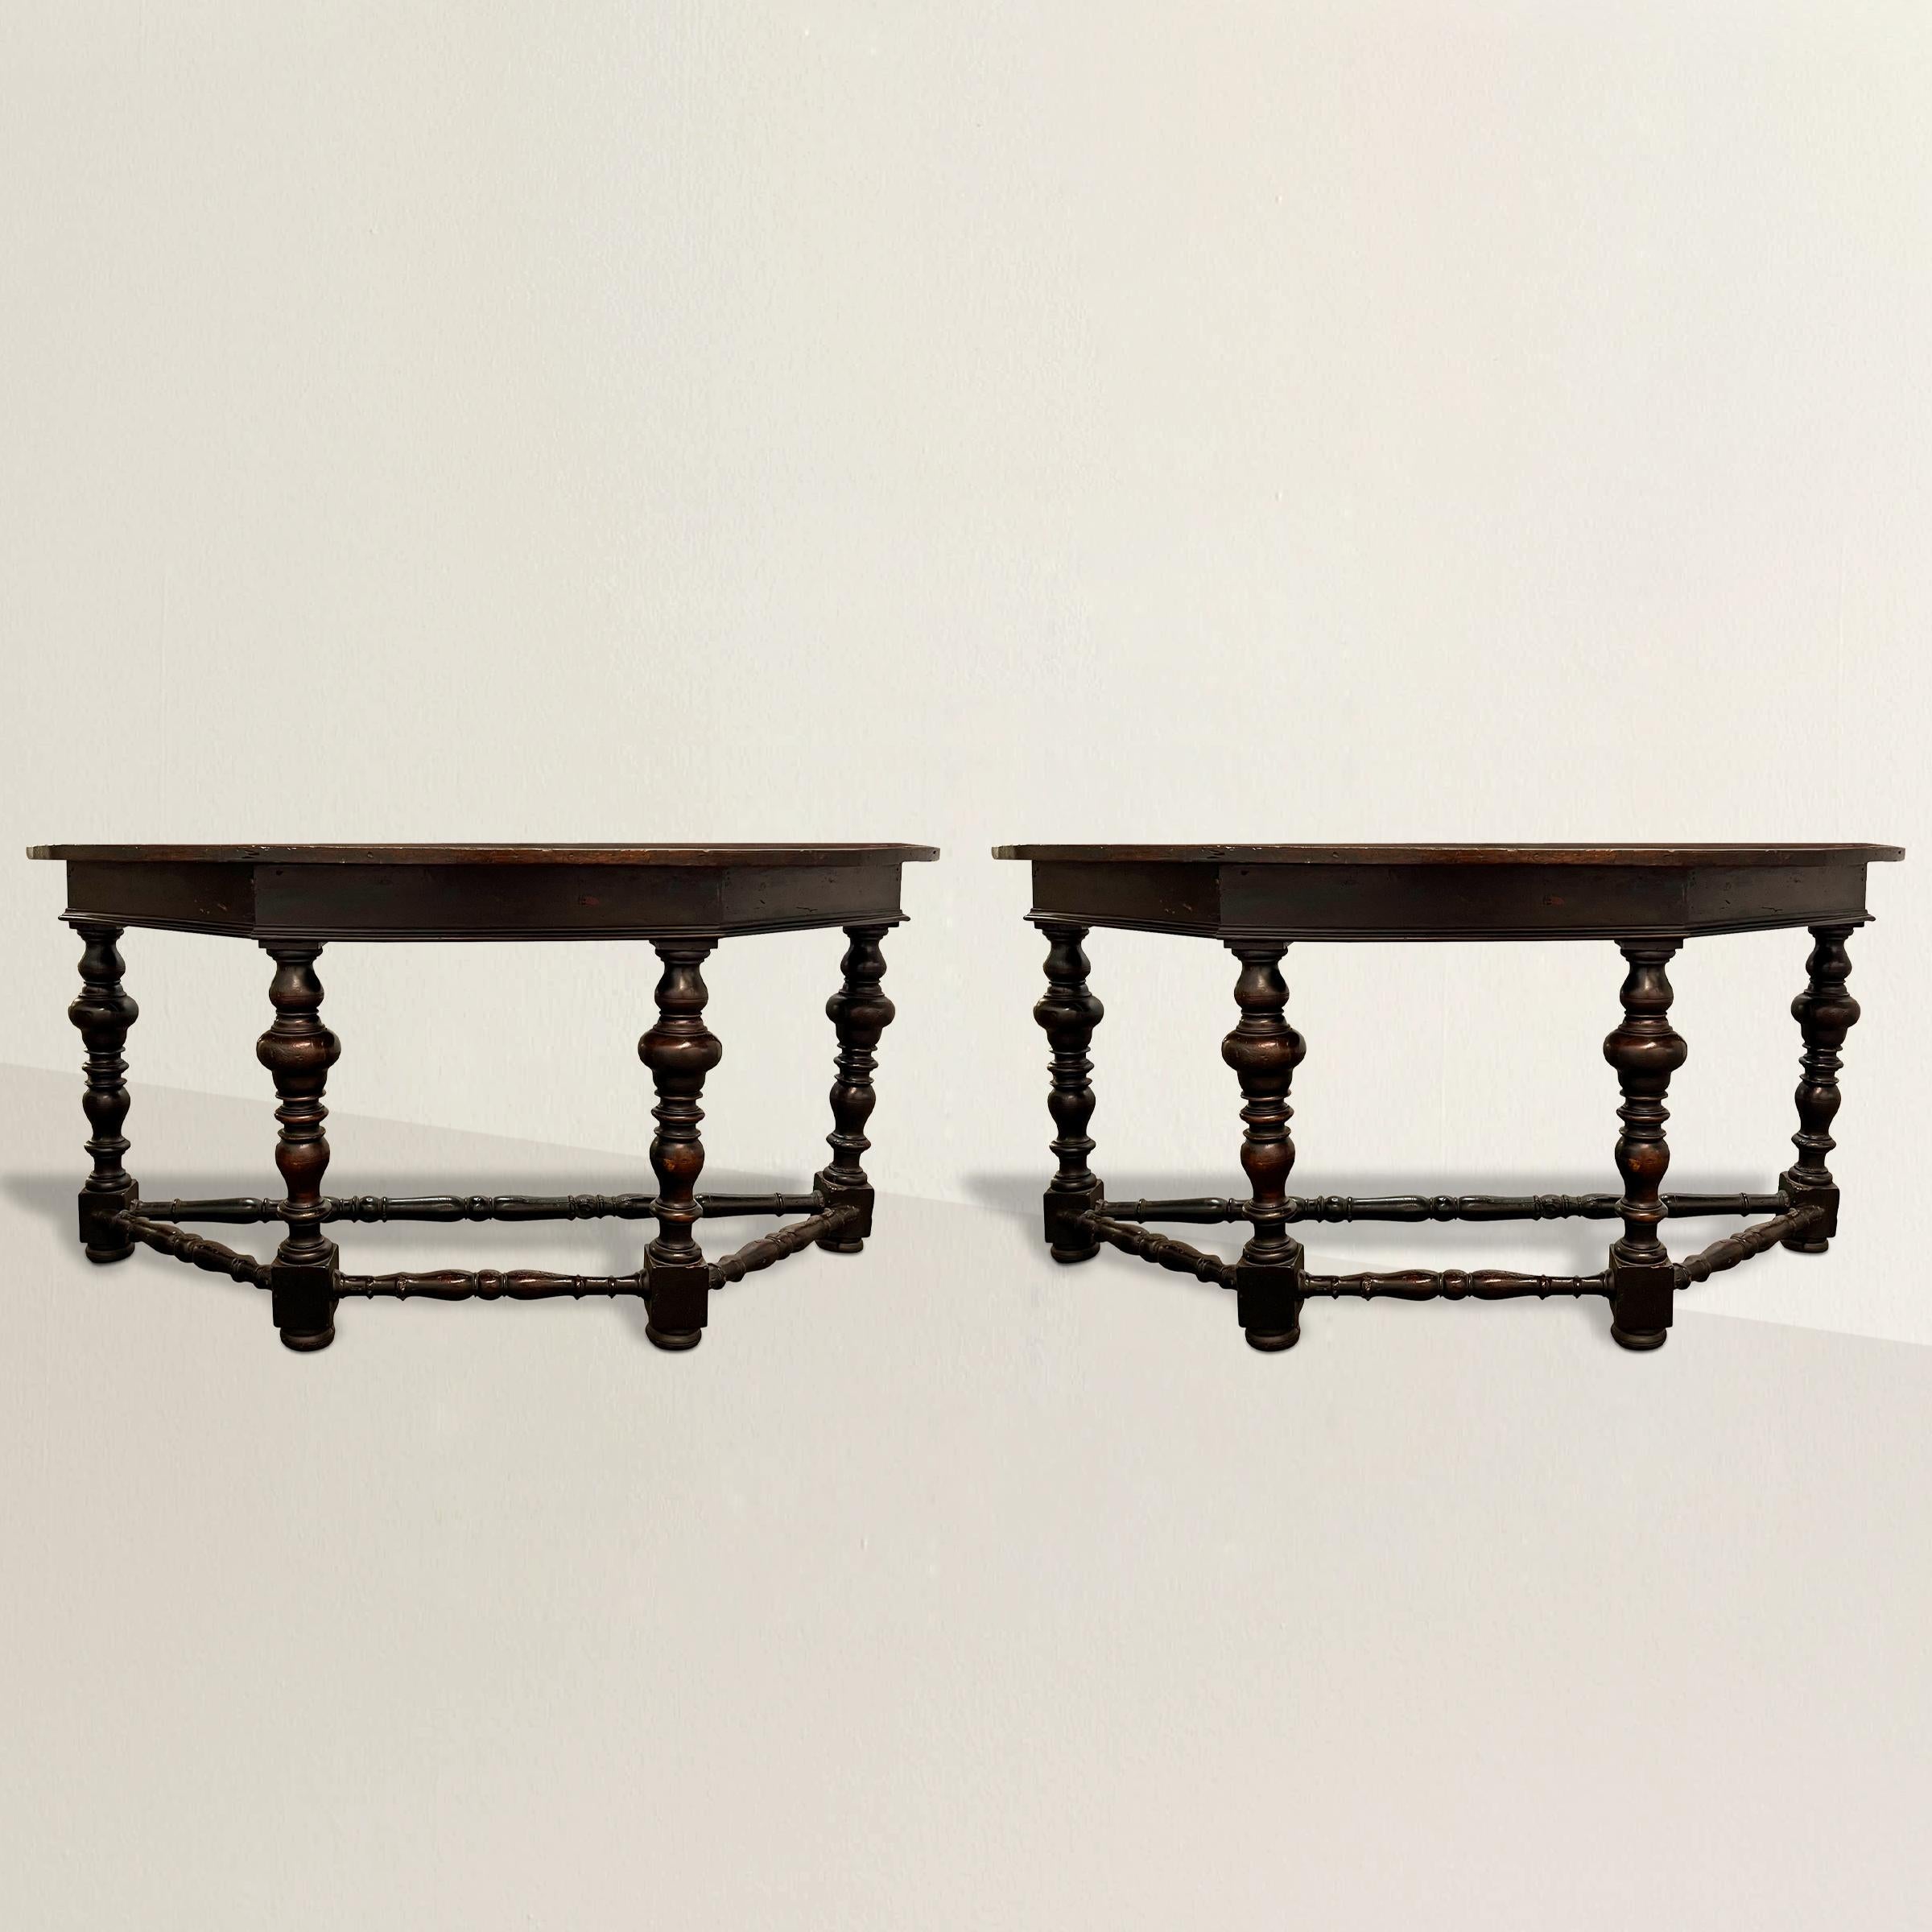 Transport yourself to the opulent elegance of 17th century Northern Italy with this exquisite pair of walnut demi-lune console tables. These remarkable pieces embody the defining characteristics of Northern Italian furniture design during this